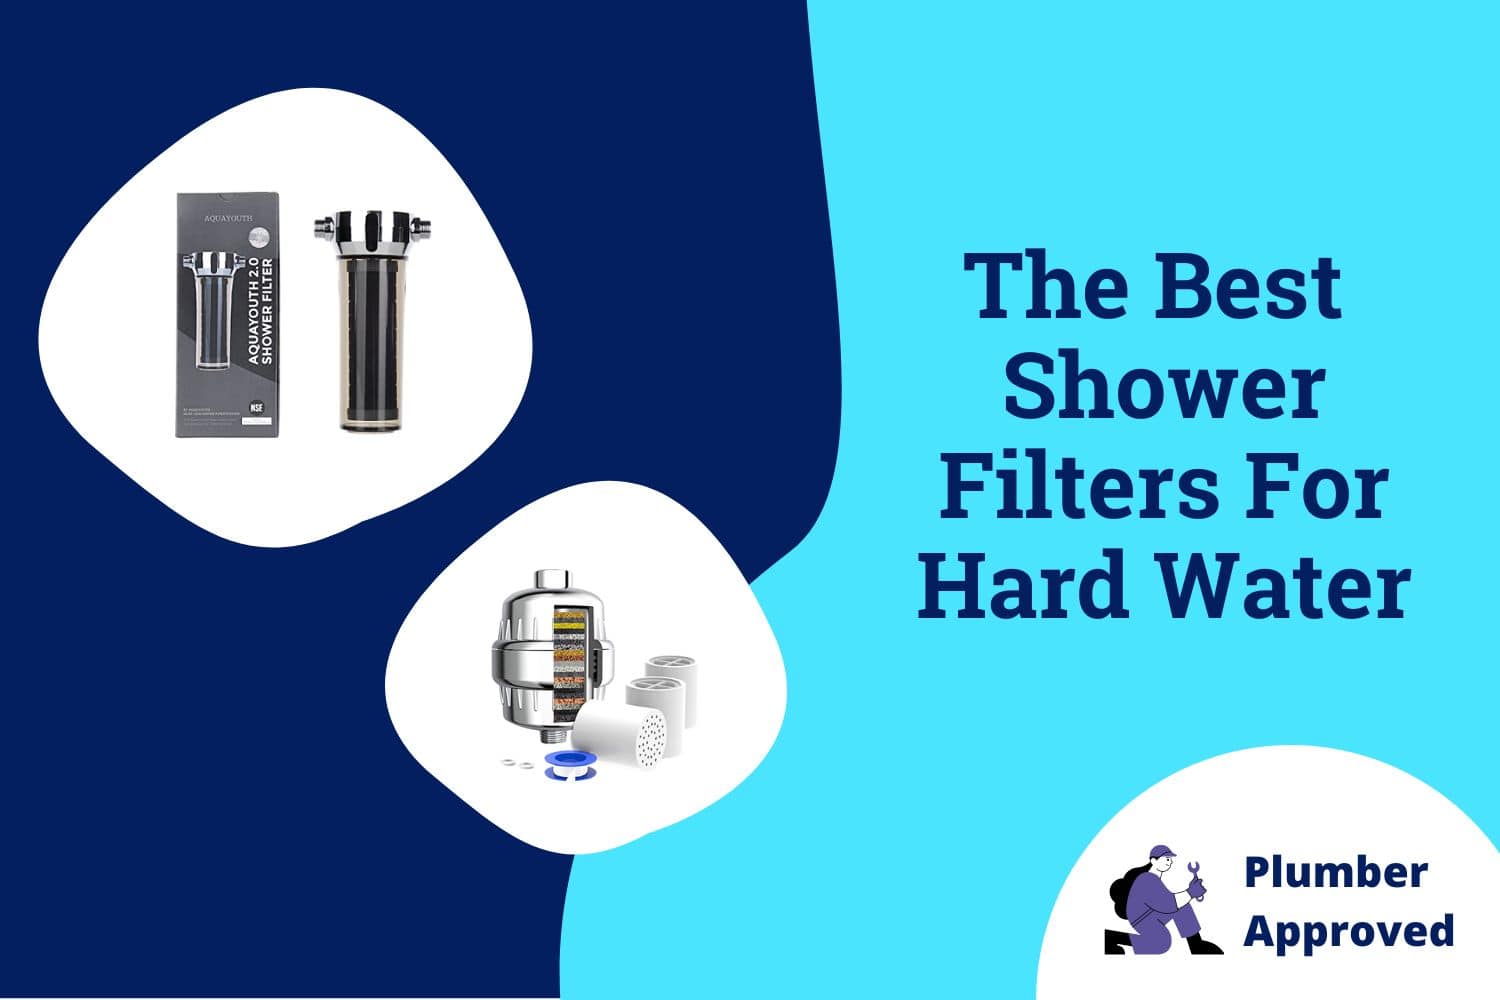 The Best Shower Filters For Hard Water